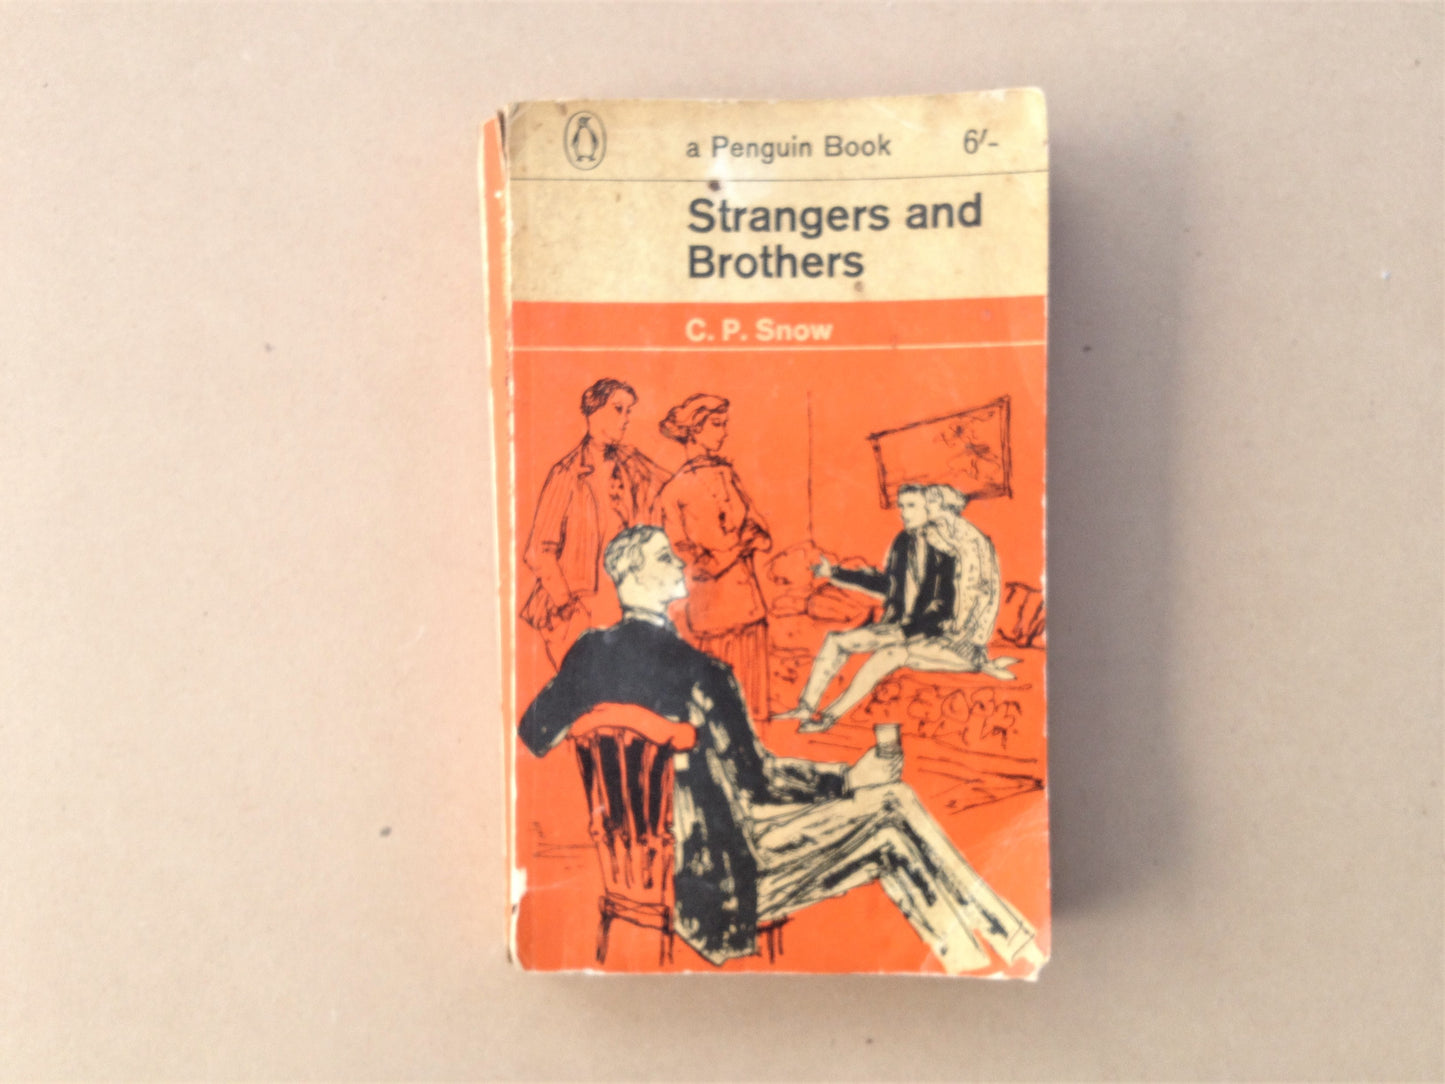 A Penguin Book Strangers and Brothers by CP Snow